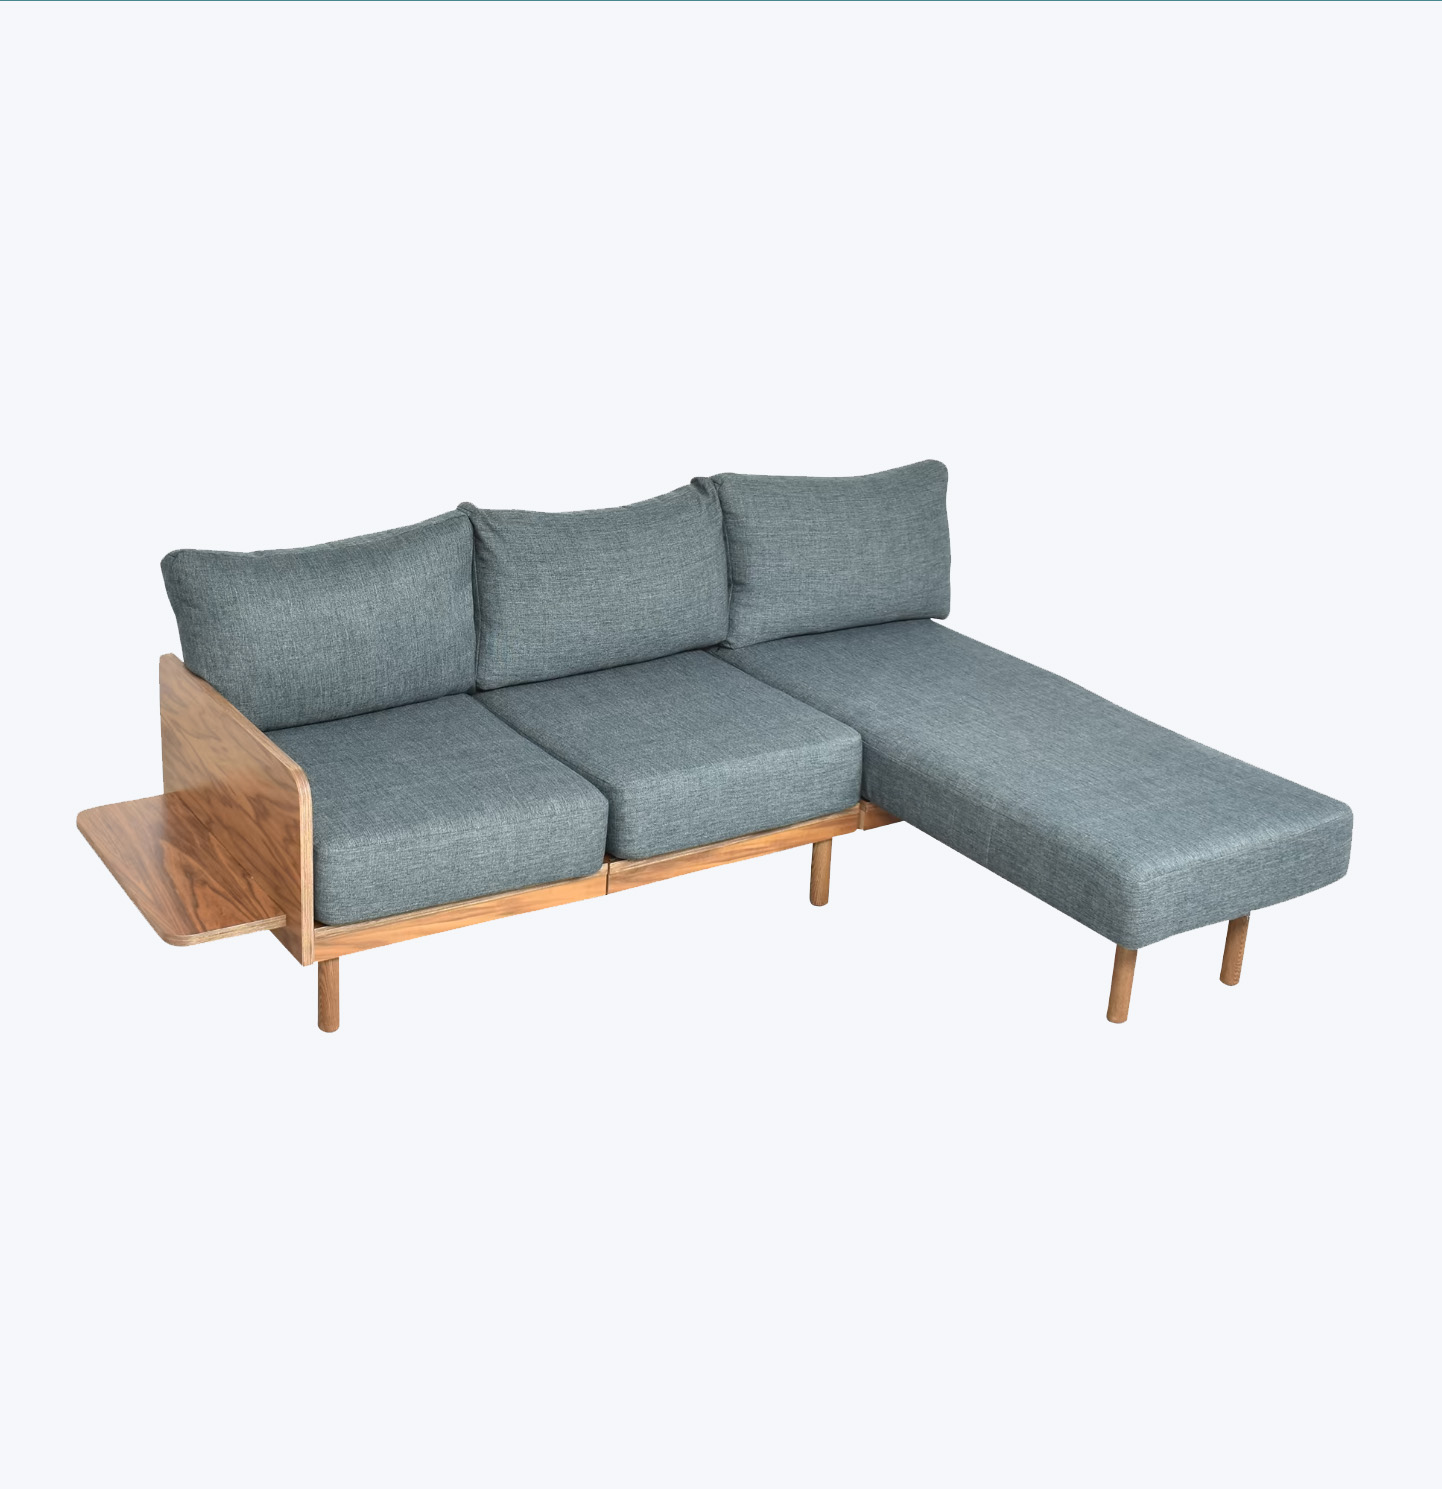 A wooden-framed gray sectional couch.